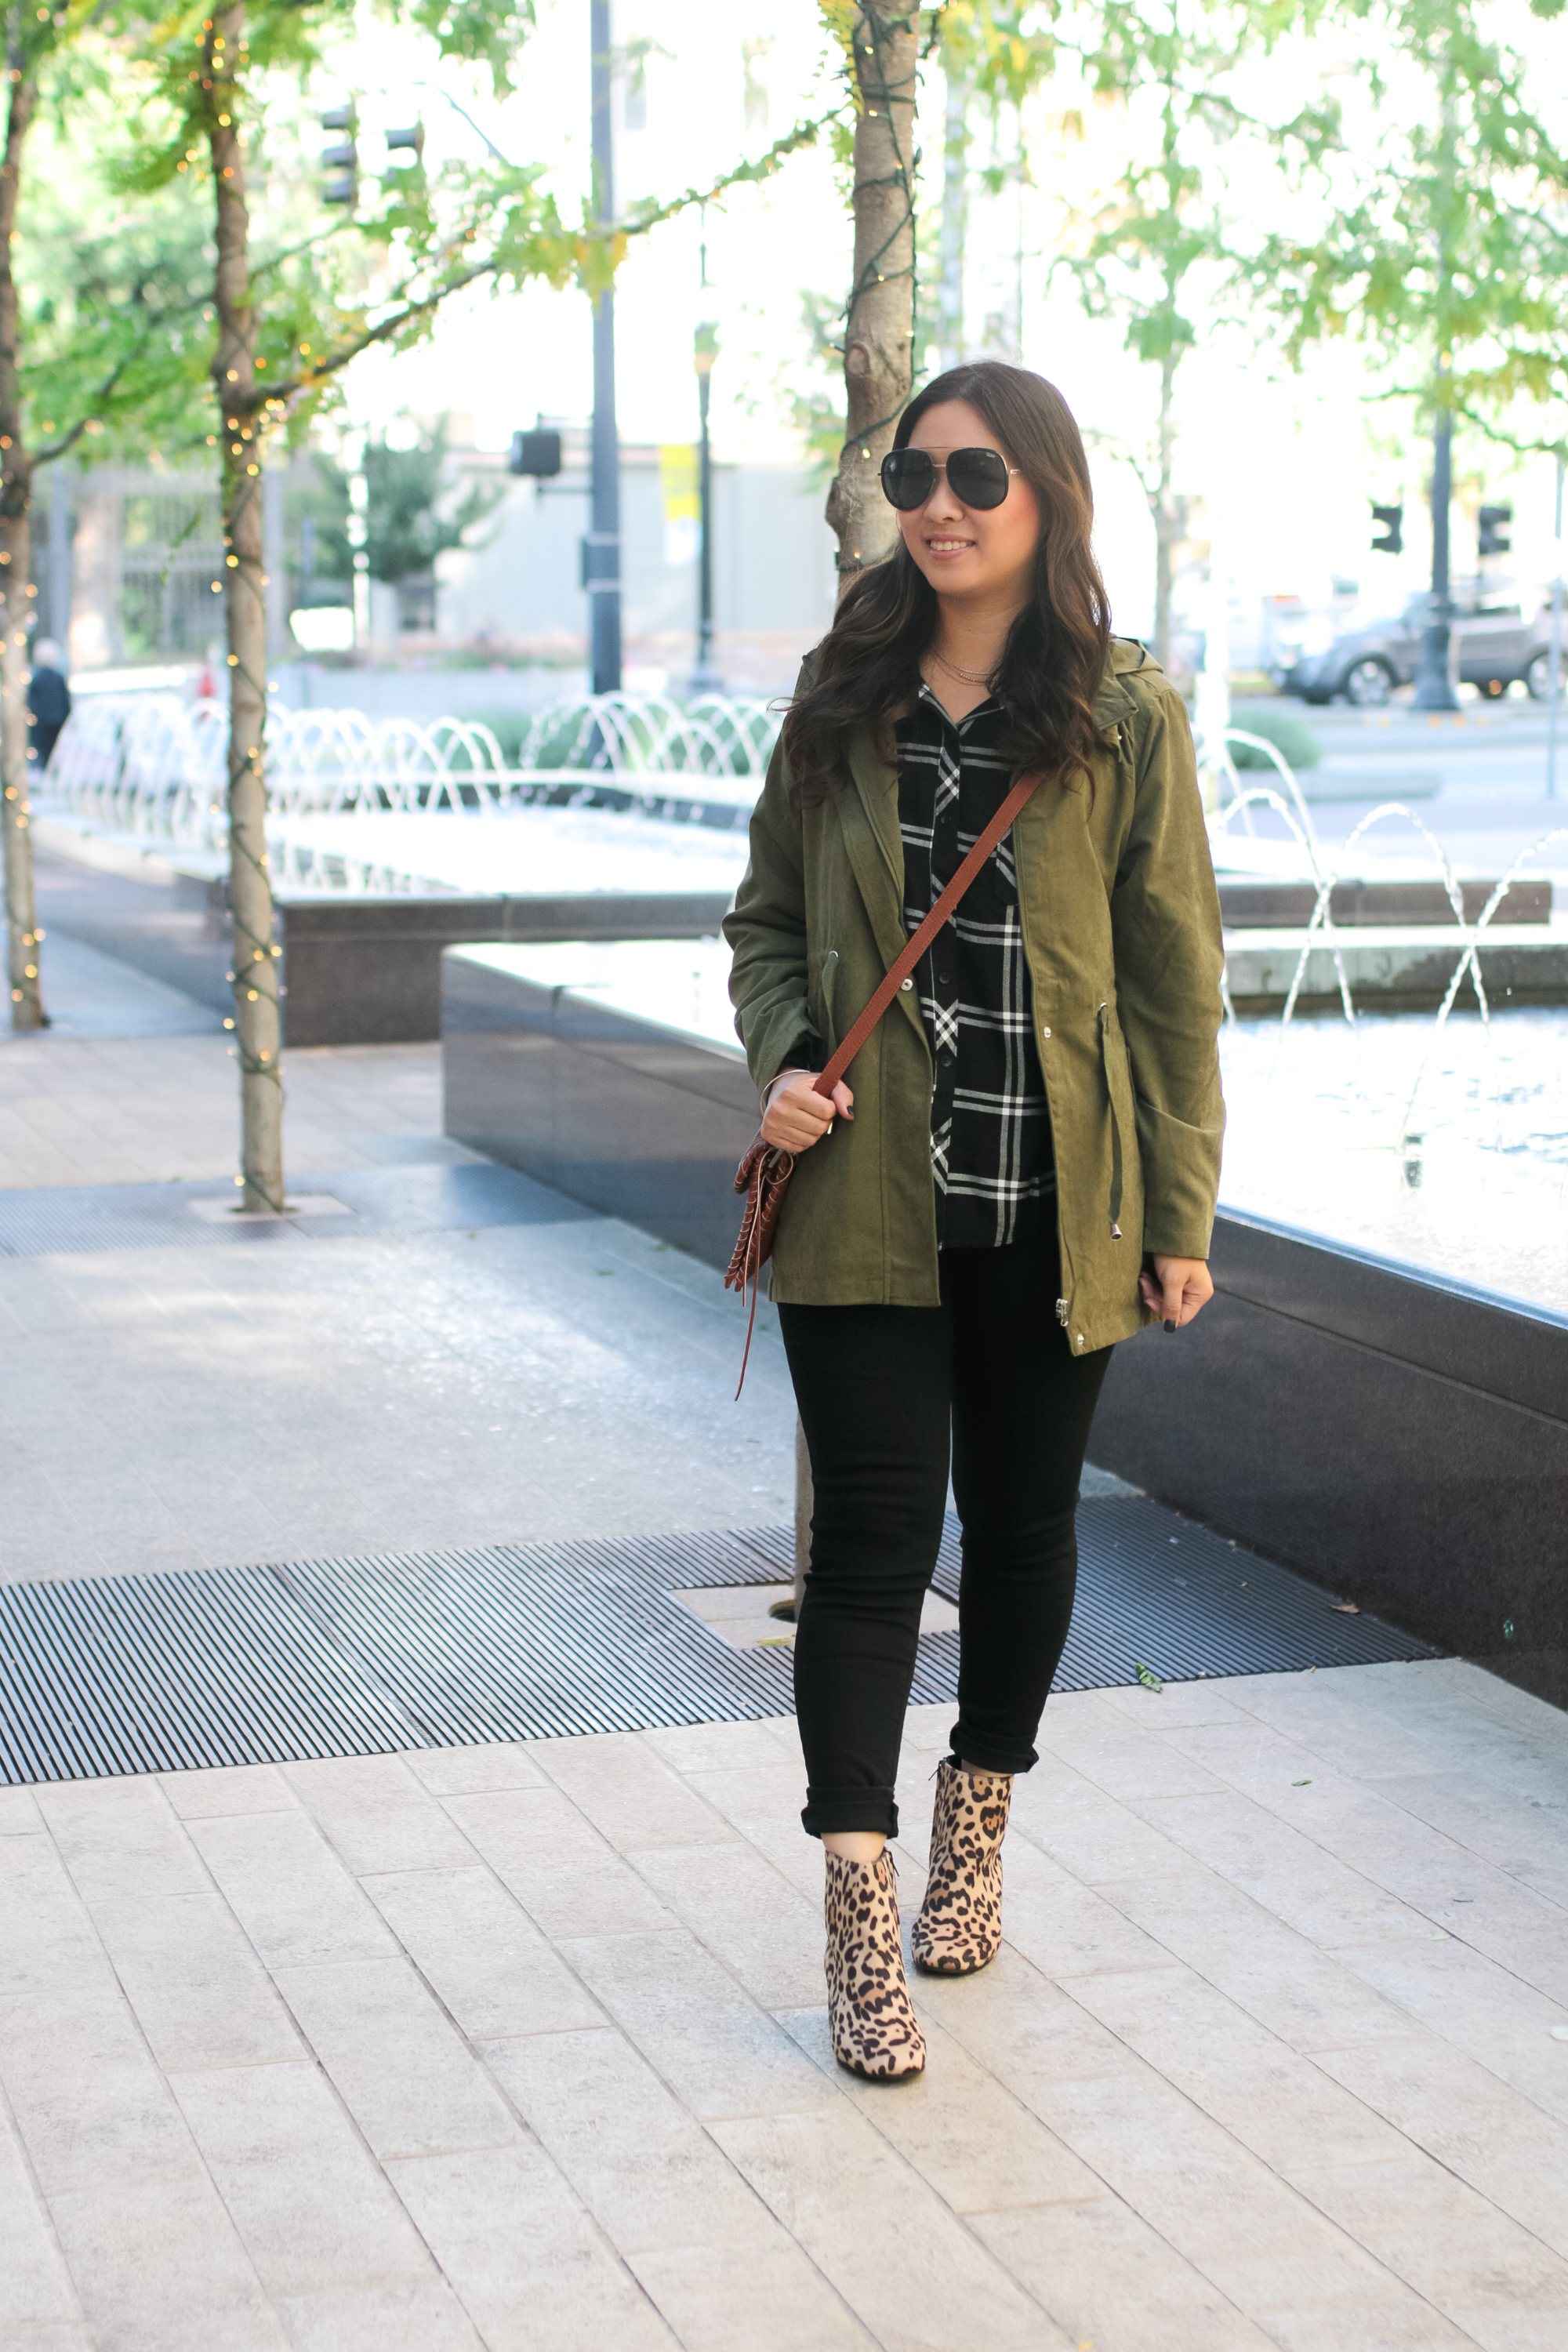 styling leopard booties